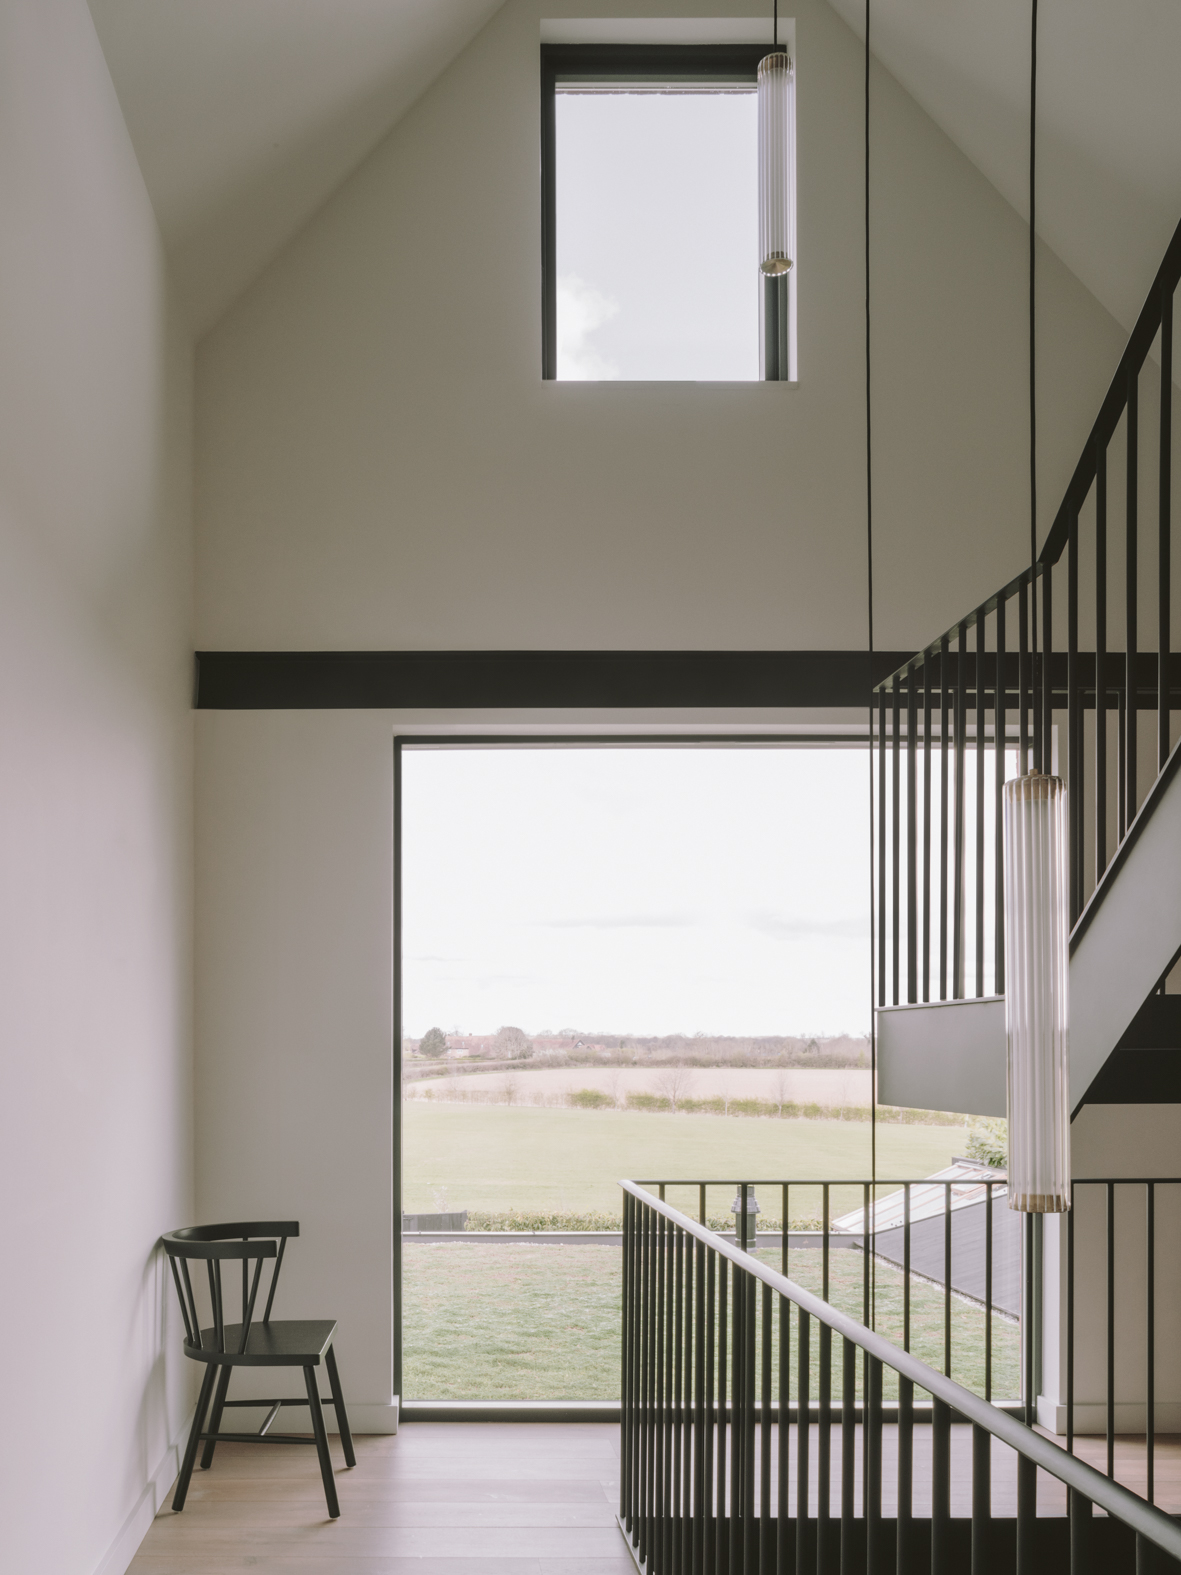 The partially suspended steel staircase at Chelwood with its views over the rural landscape.